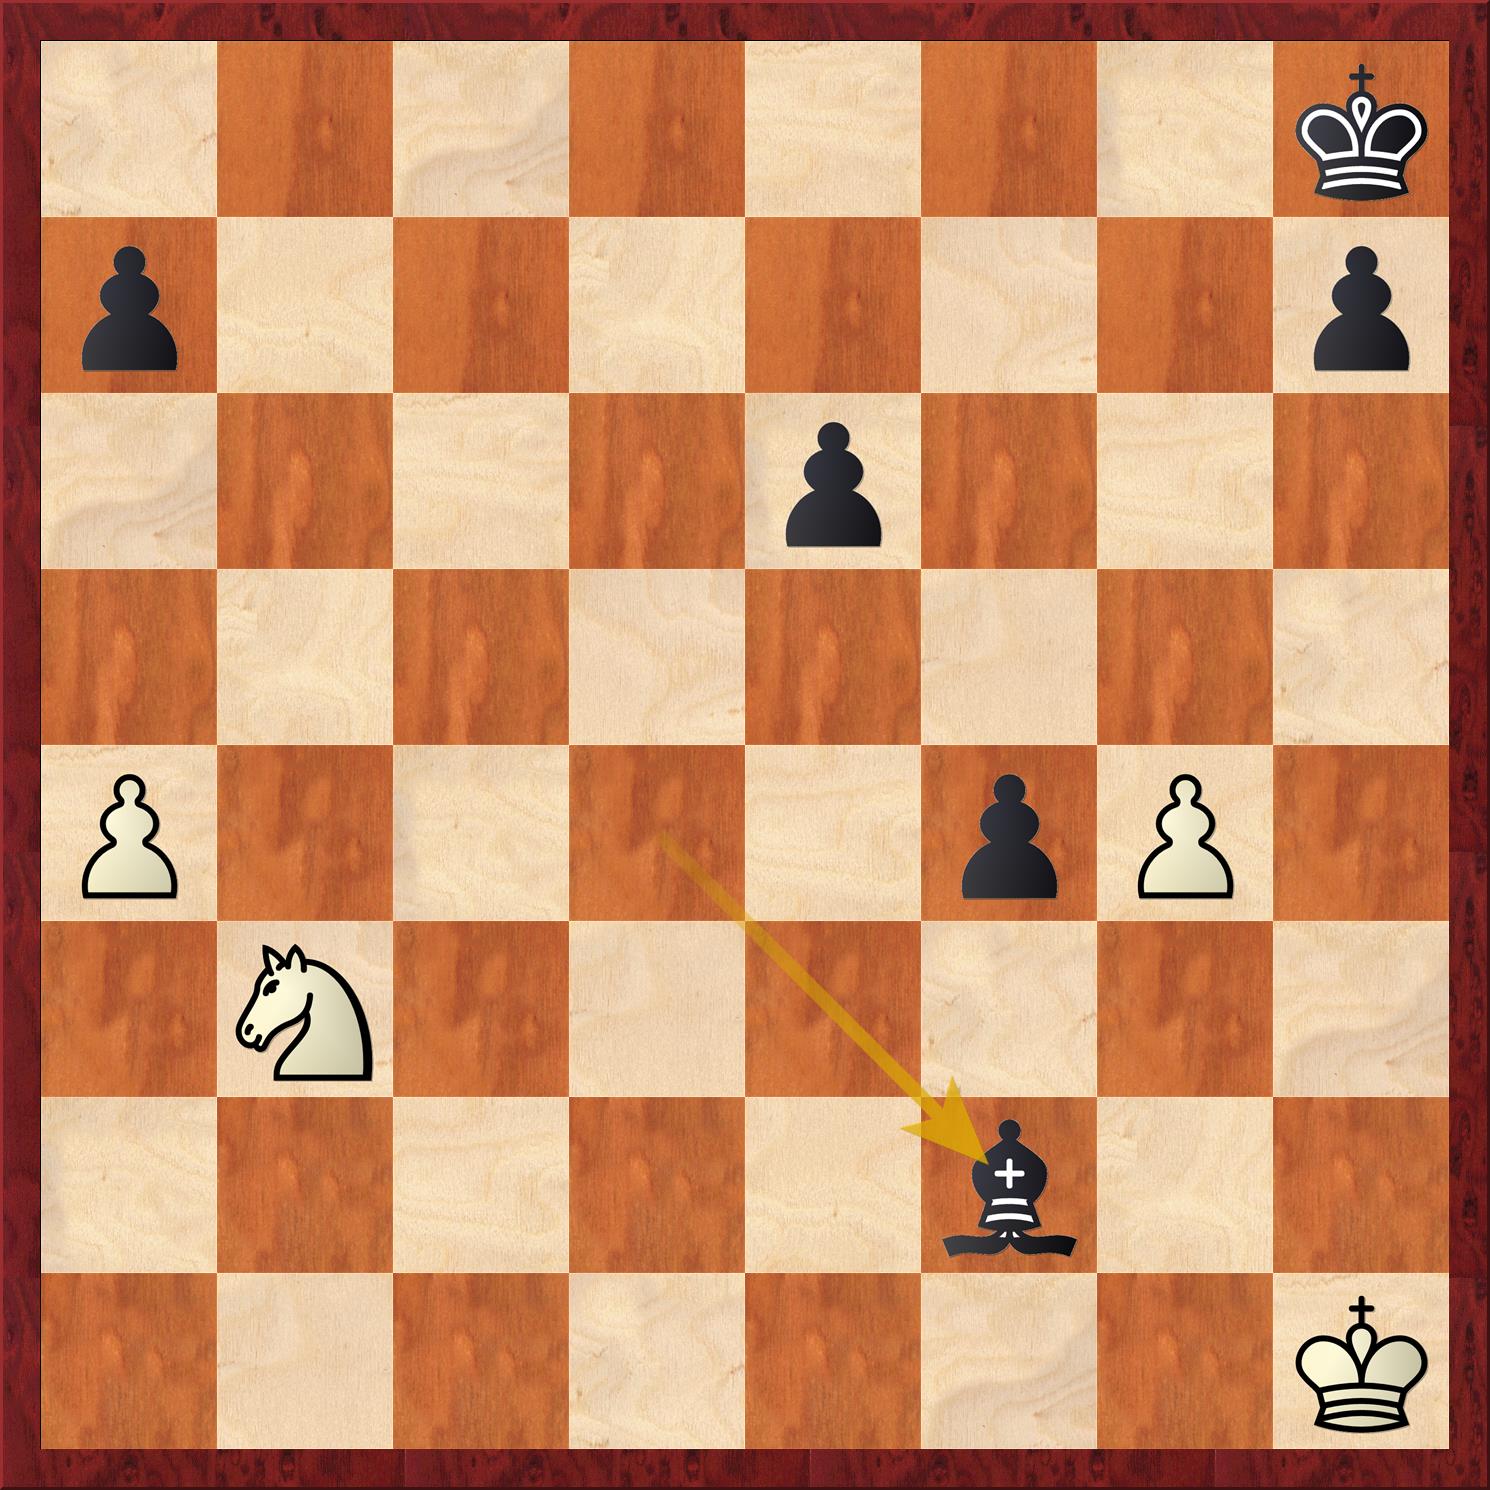 Ding Liren's chess opening creativity backfired tremendously in Game 2